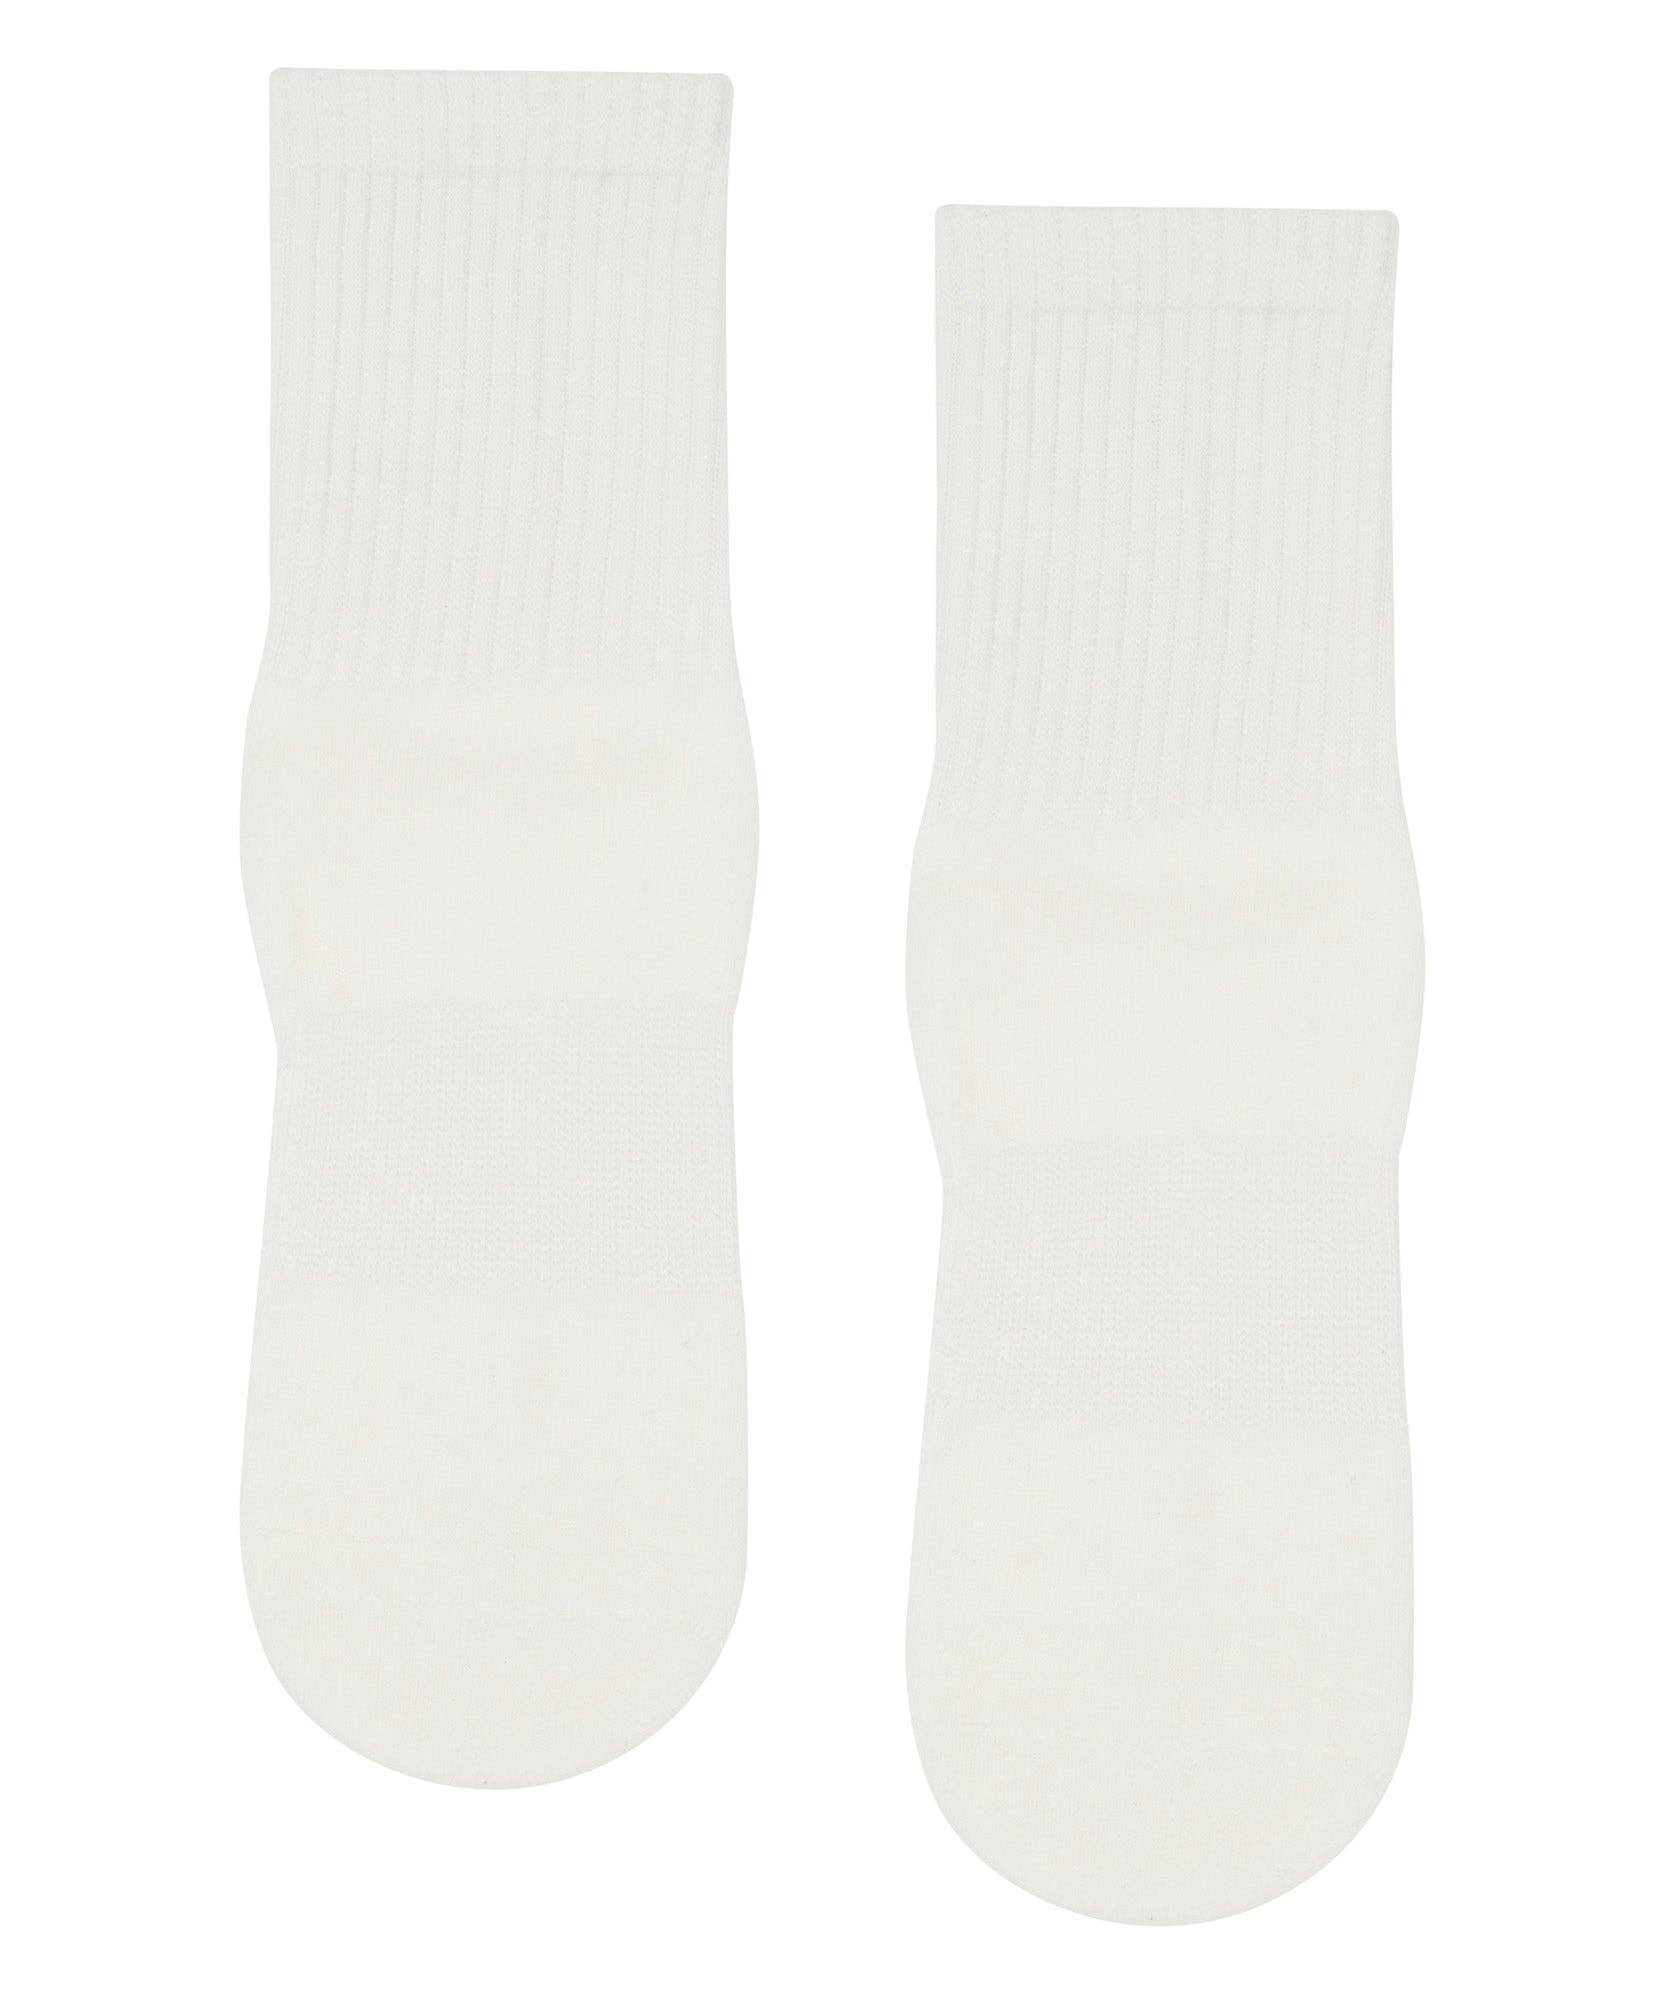 Wholesale Crew Non Slip Grip Socks - Ivory for your store - Faire